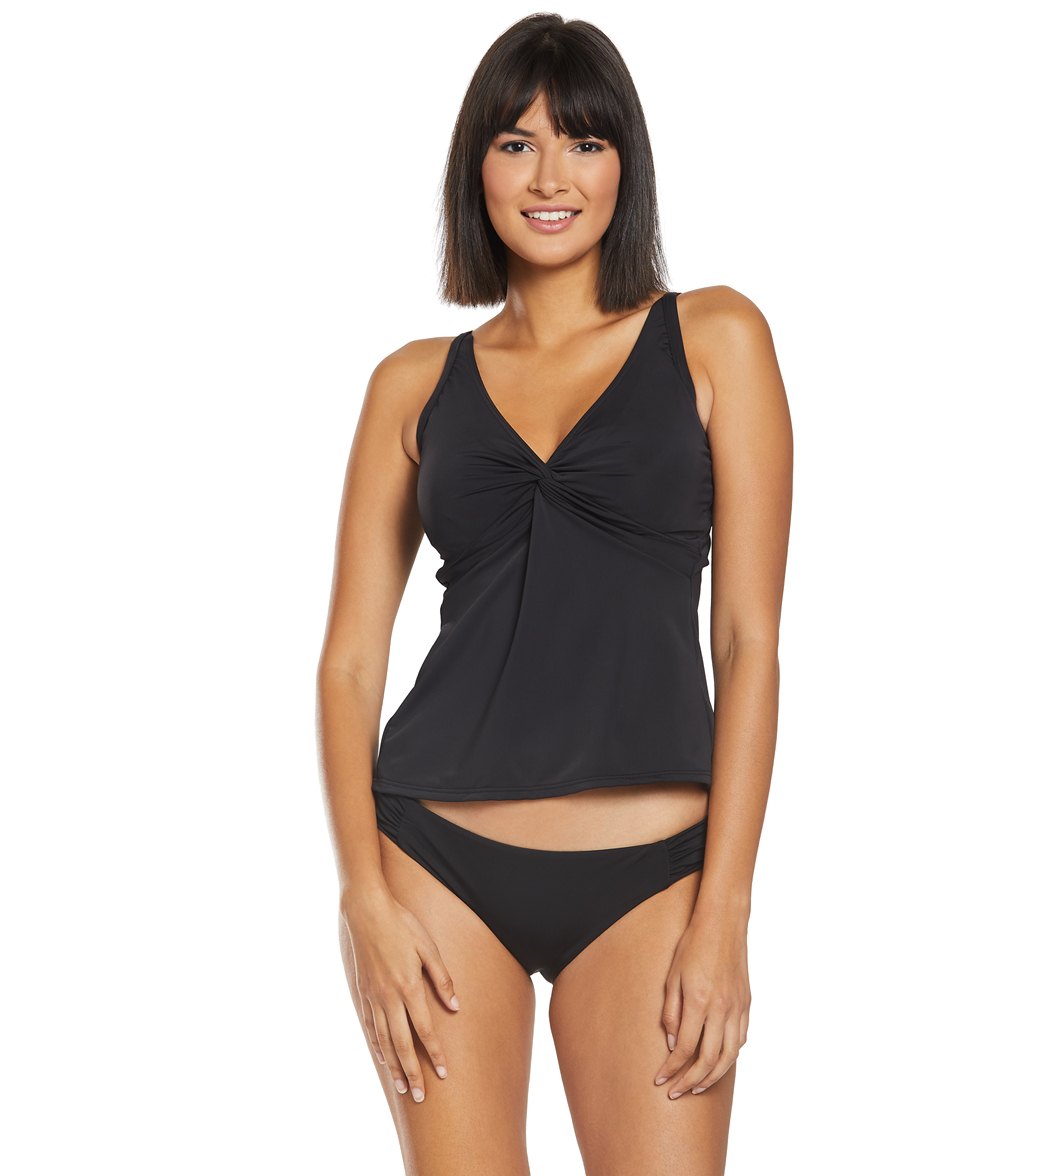 Sunsets Solid Forever Tankini Top D/Dd Cup - Black 32D - Swimoutlet.com